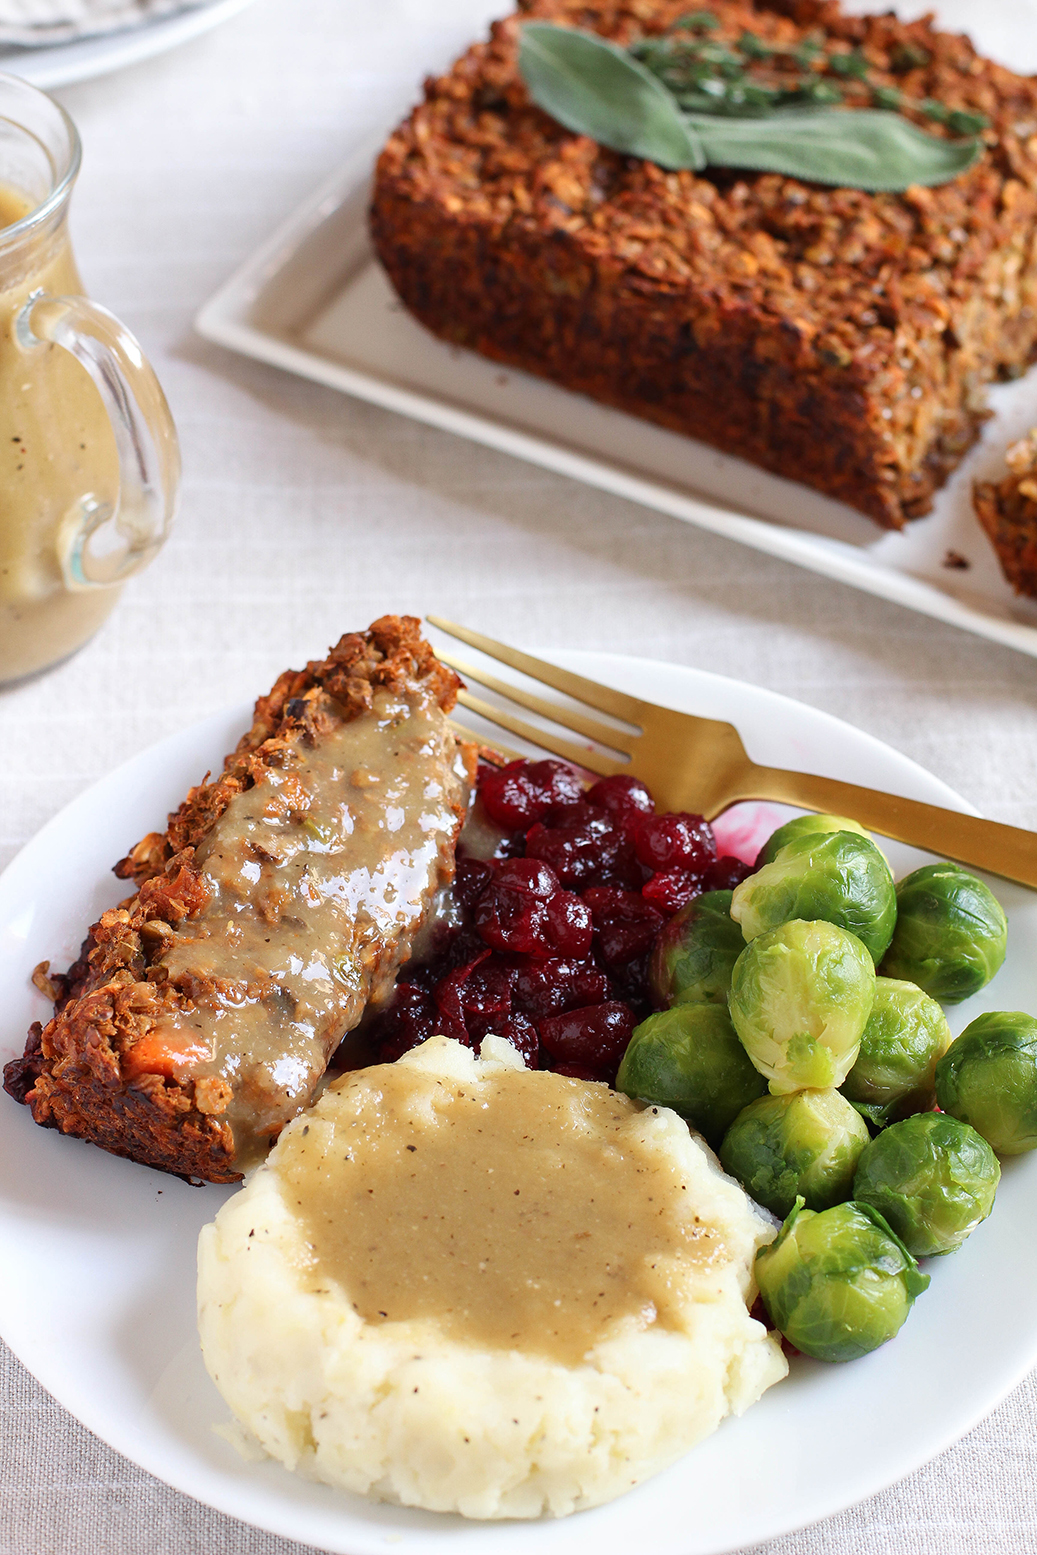 Vegan & gluten free lentil loaf with classic brown onion gravy